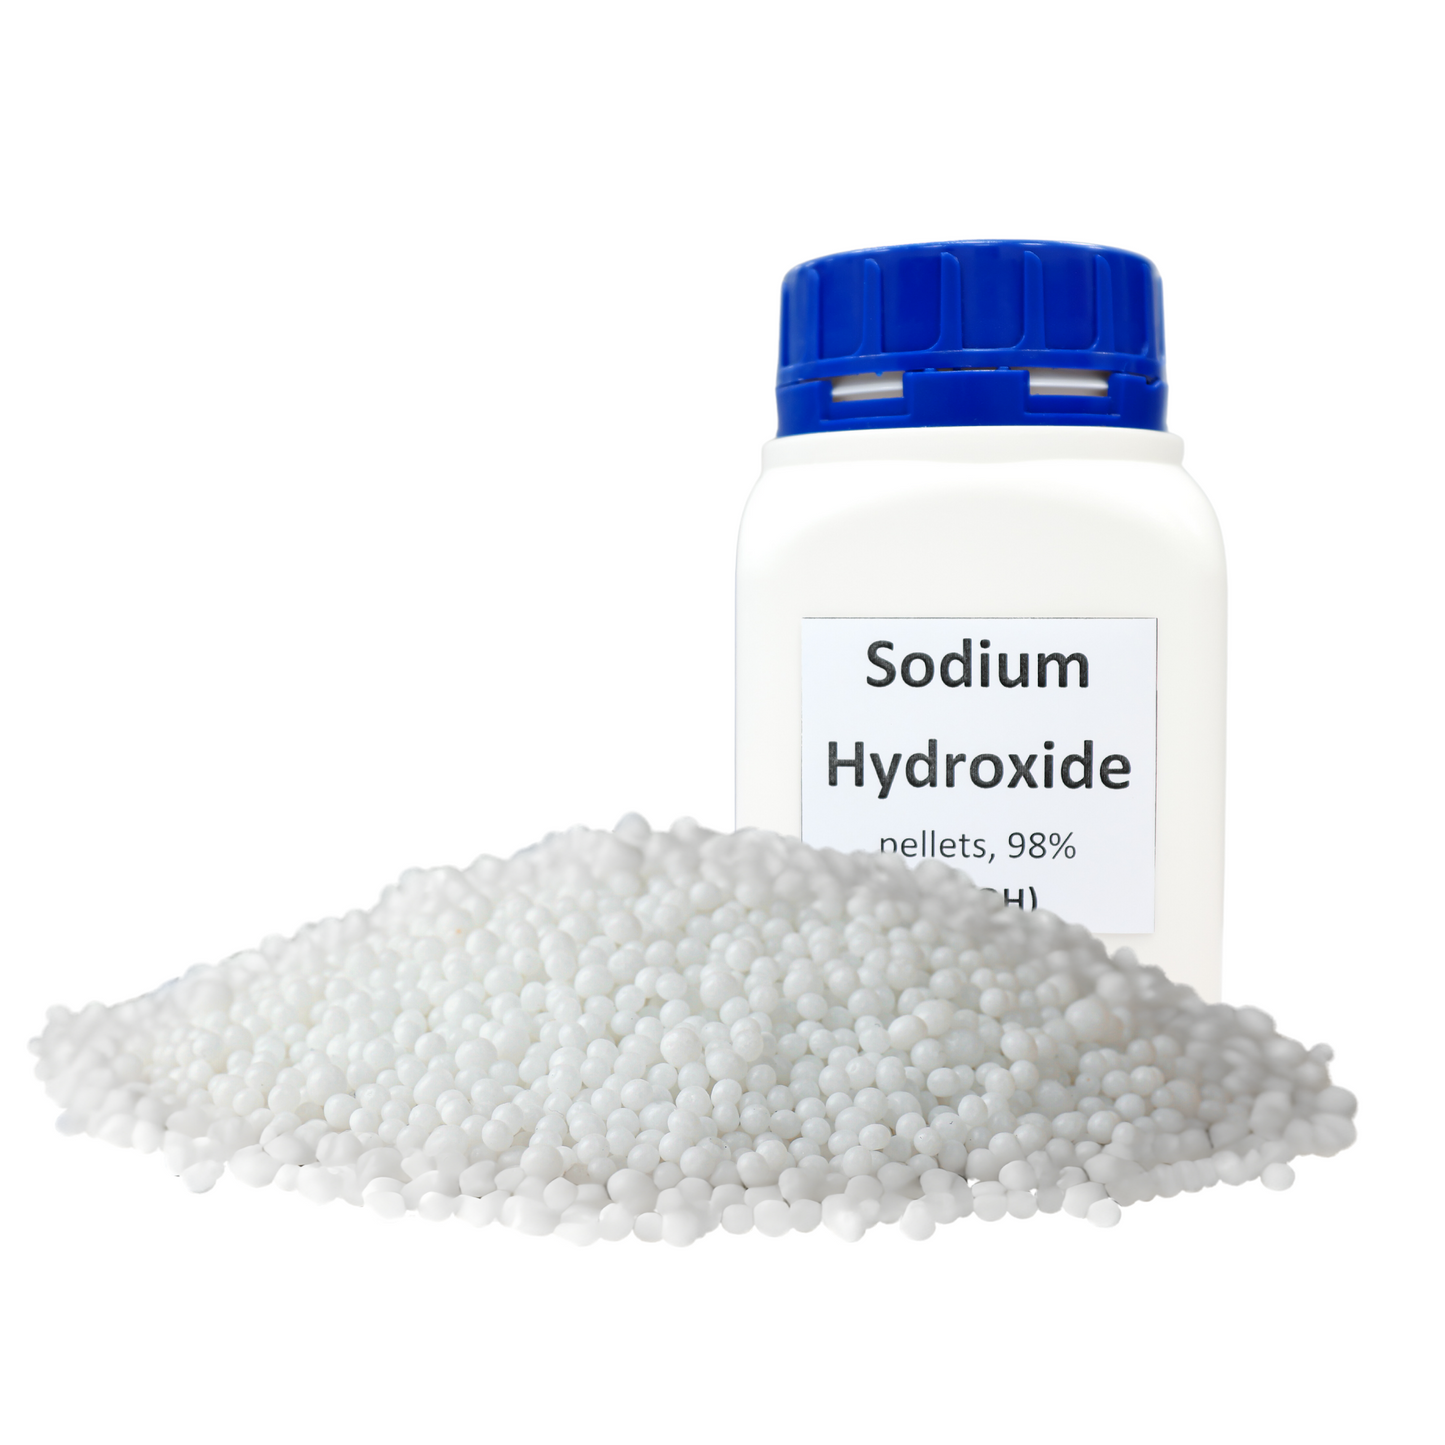 Sodium hydroxide bottle and pellets - Stock Image - C004/7703 - Science  Photo Library